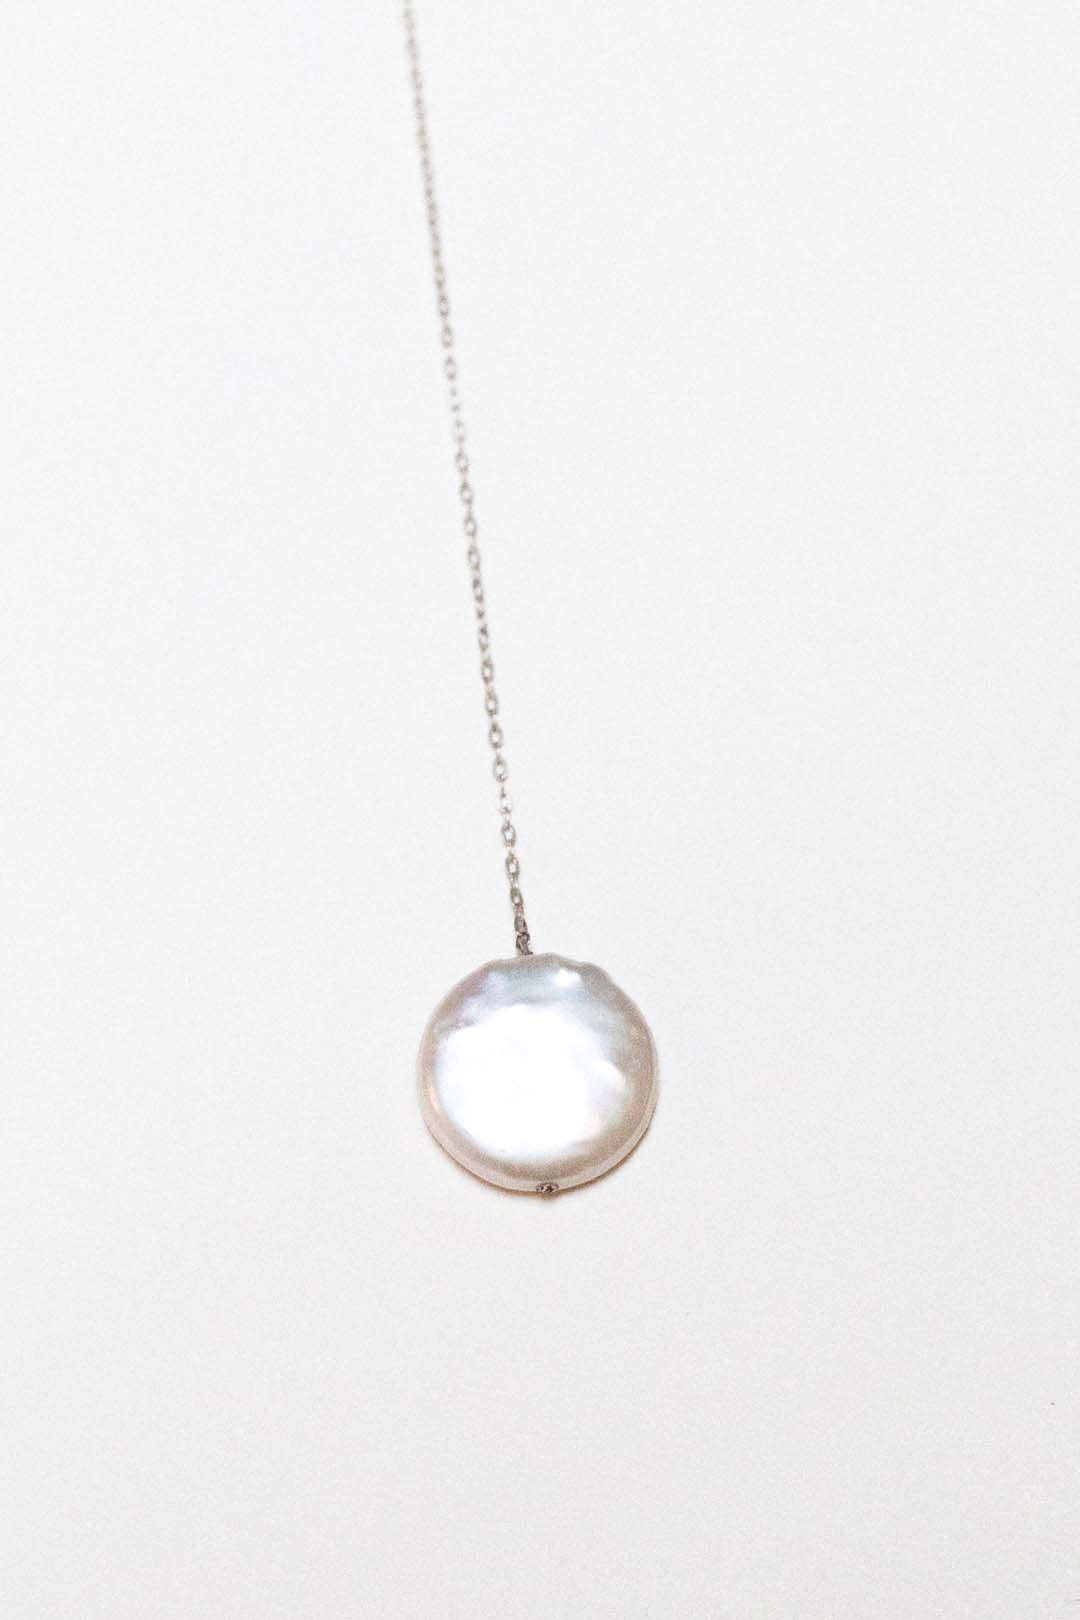 MOON PEARL LARIAT NECKLACE